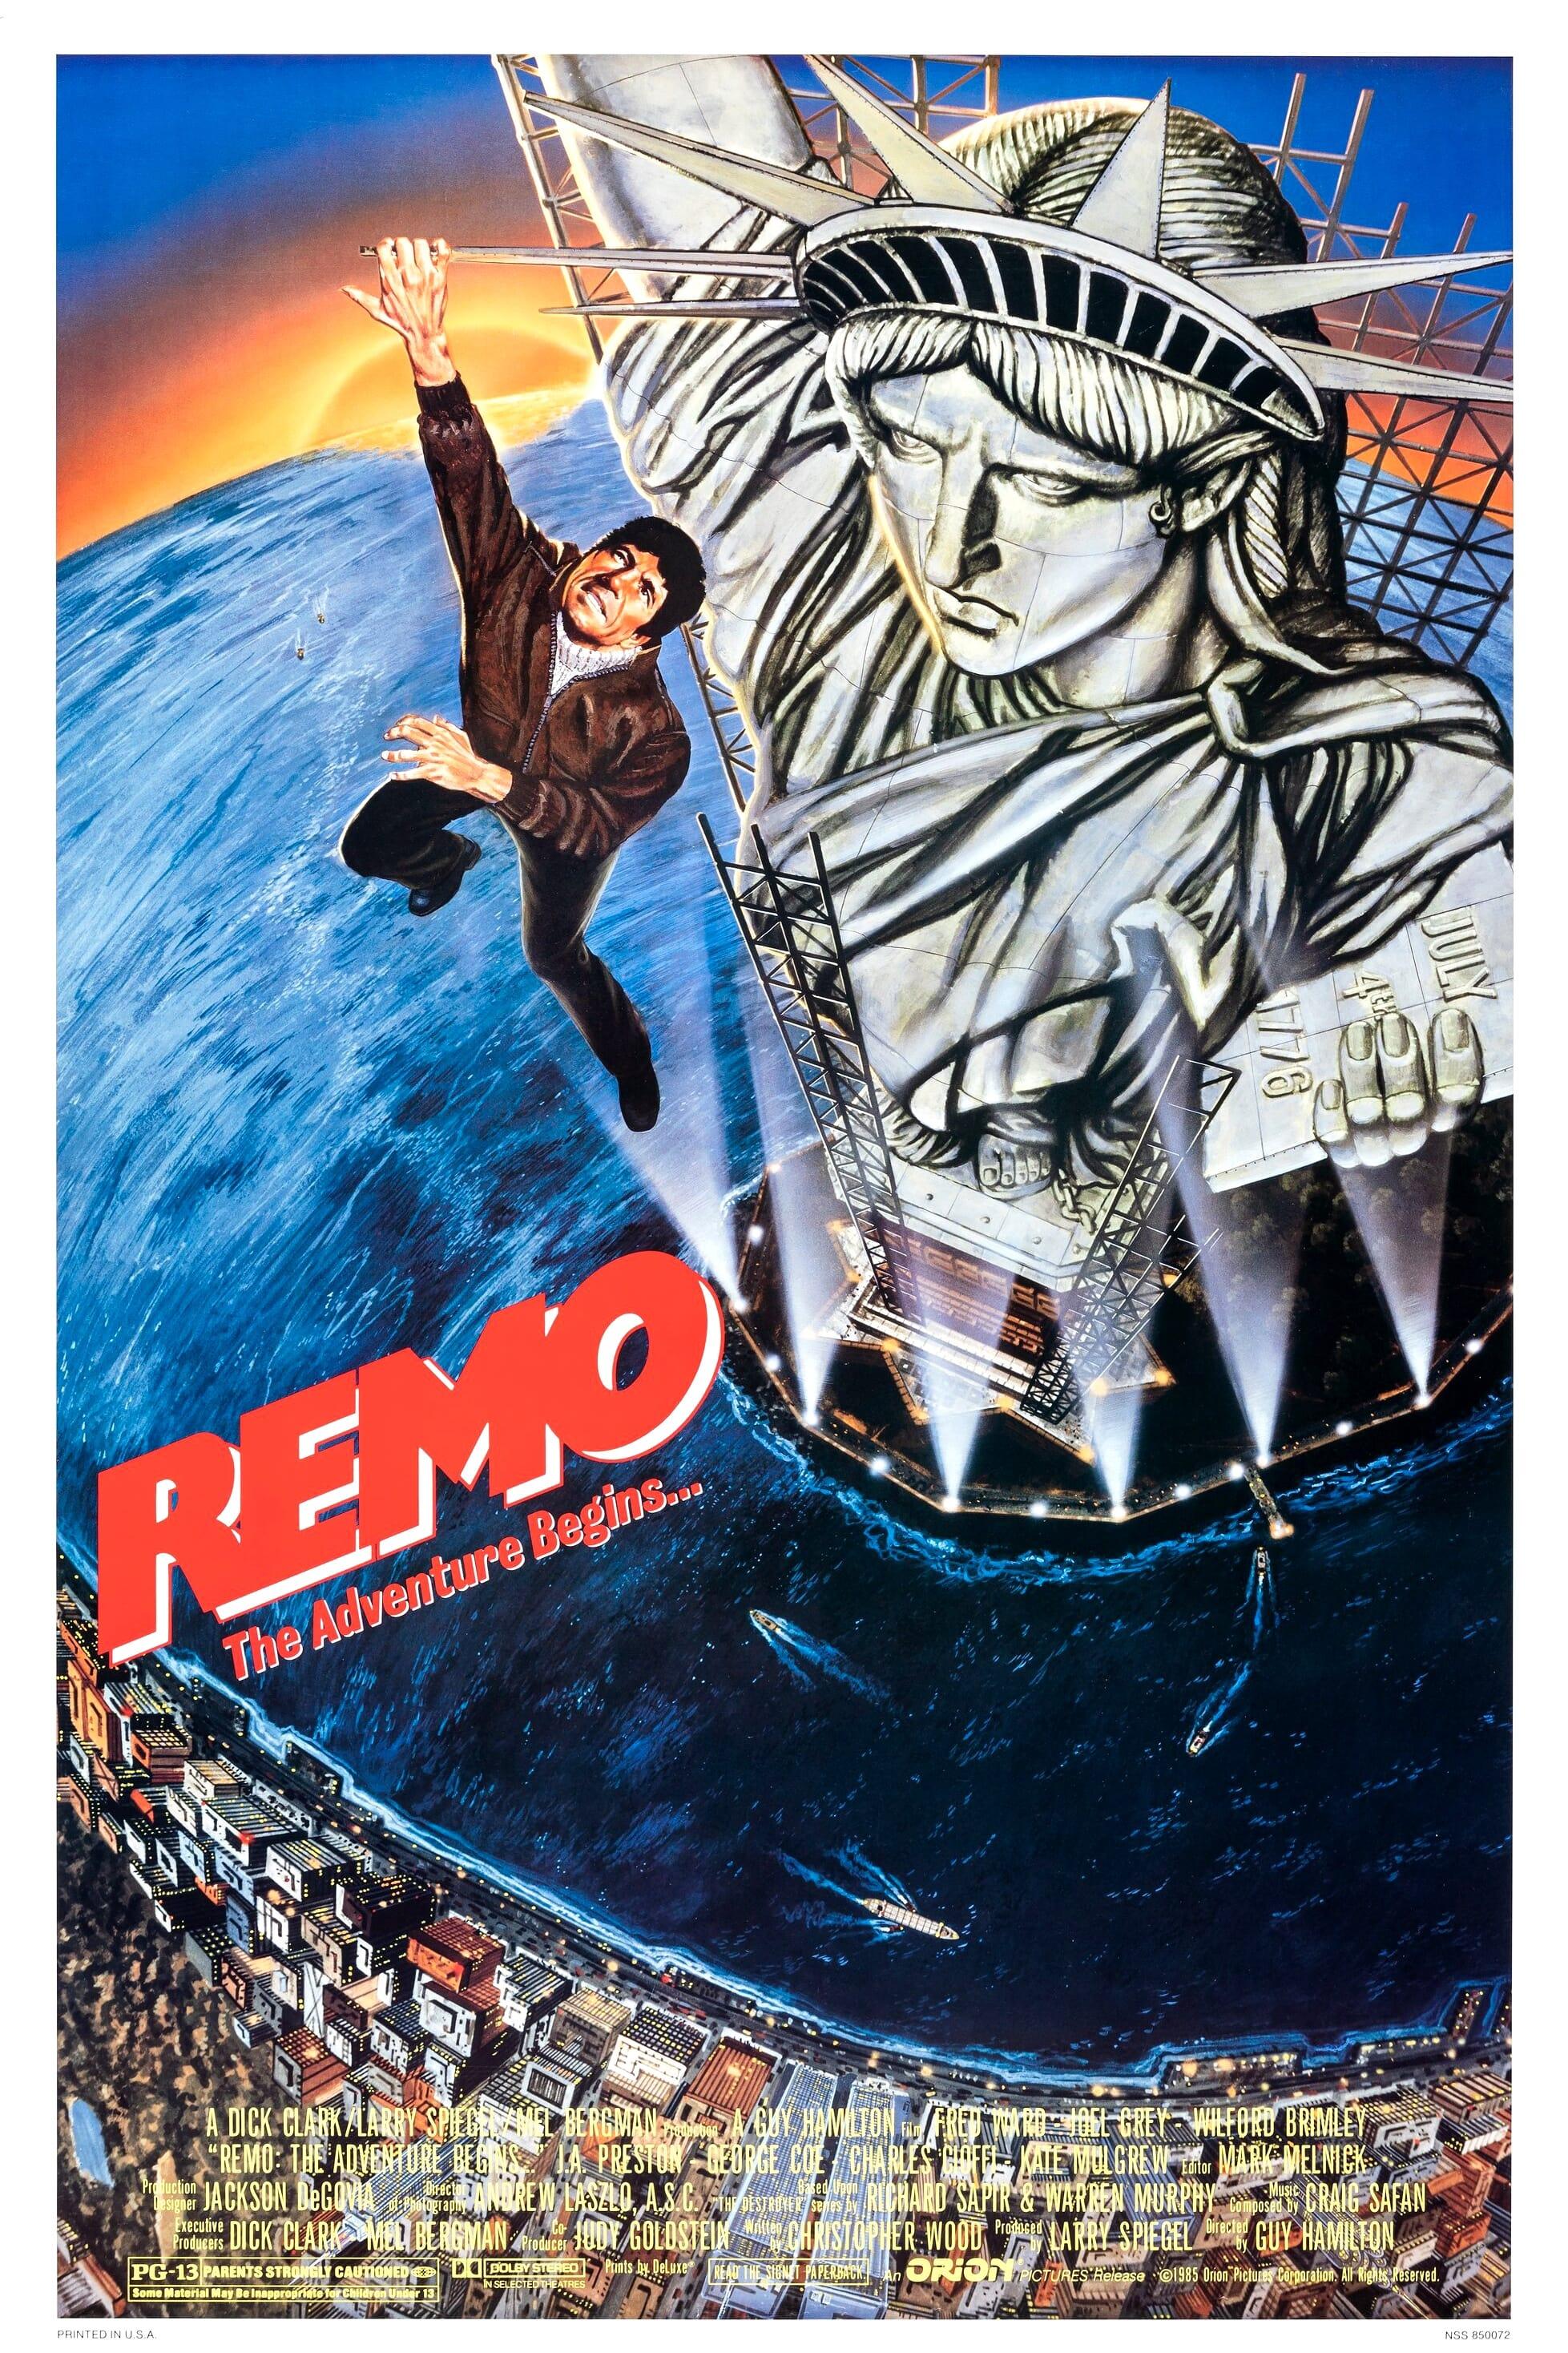 Remo Williams: The Adventure Begins poster